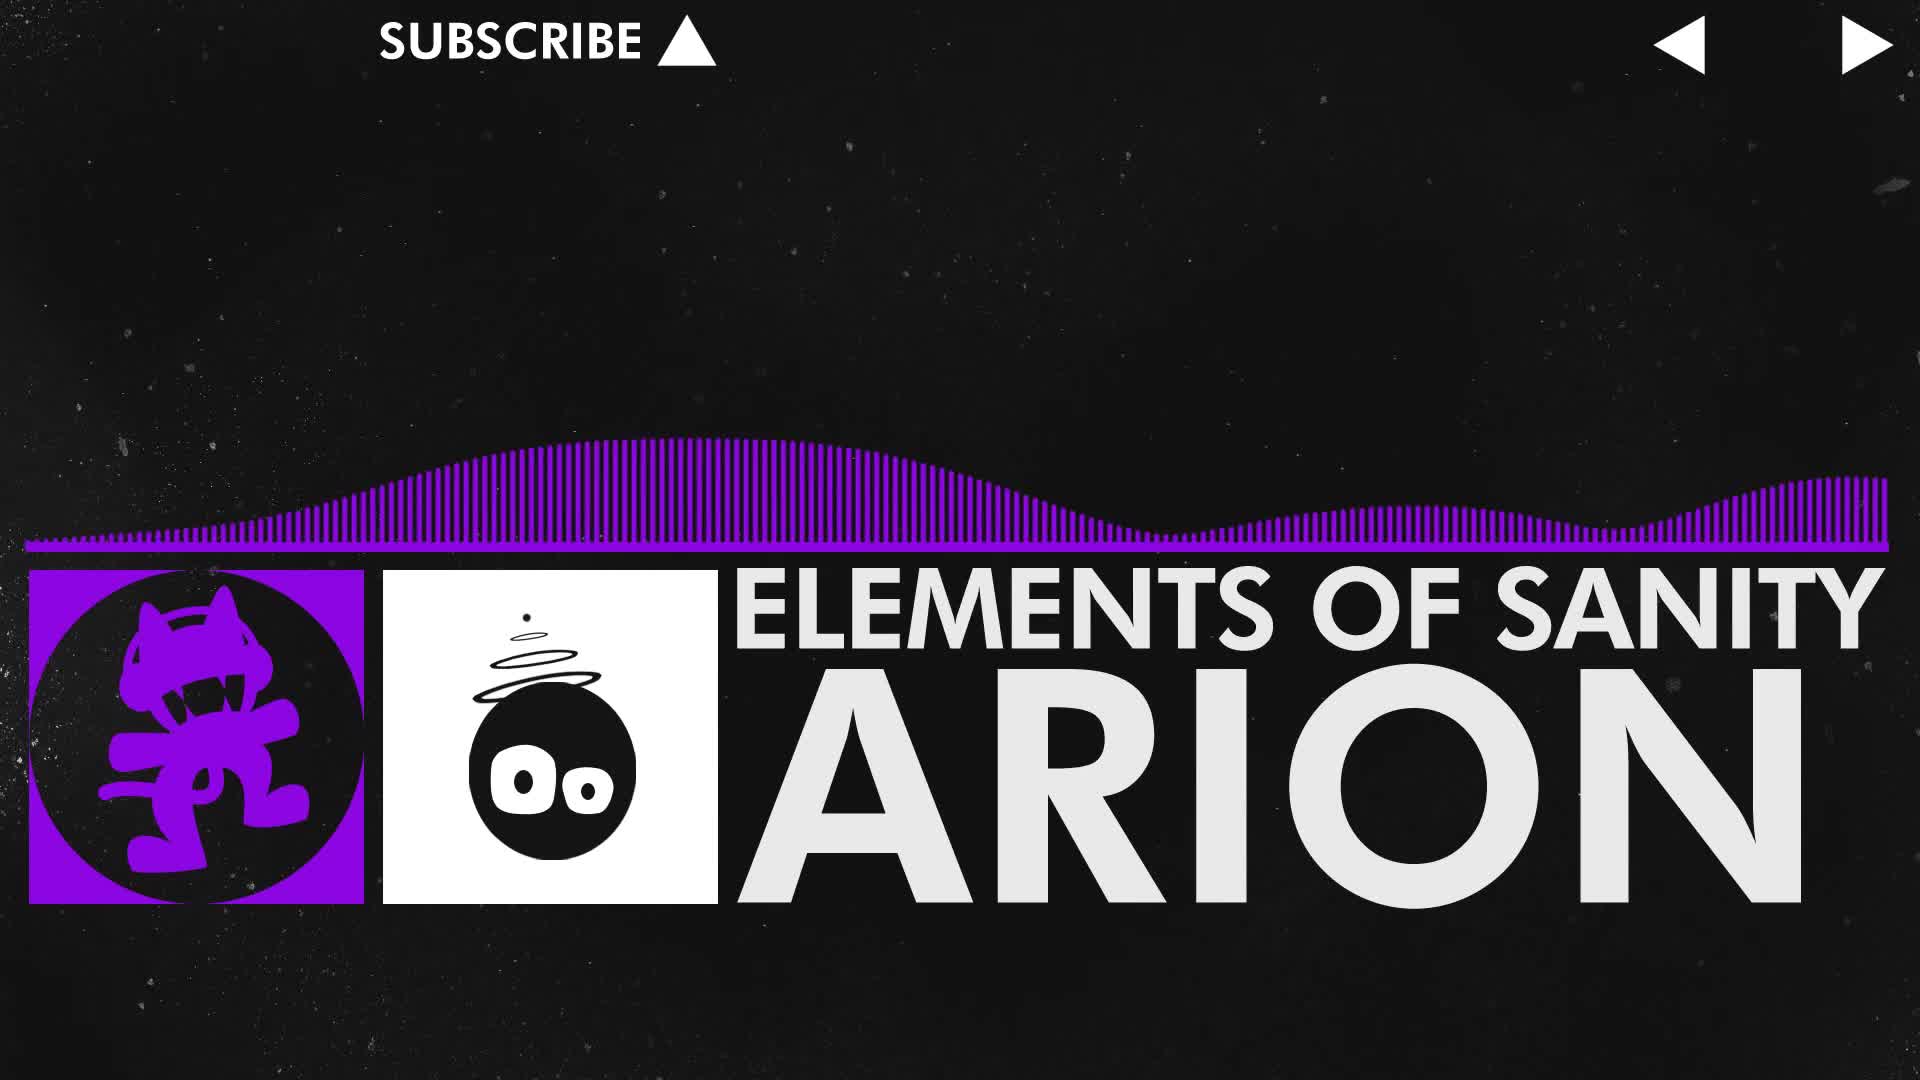 [Dubstep] - Elements of Sanity - Arion [Monstercat Release]